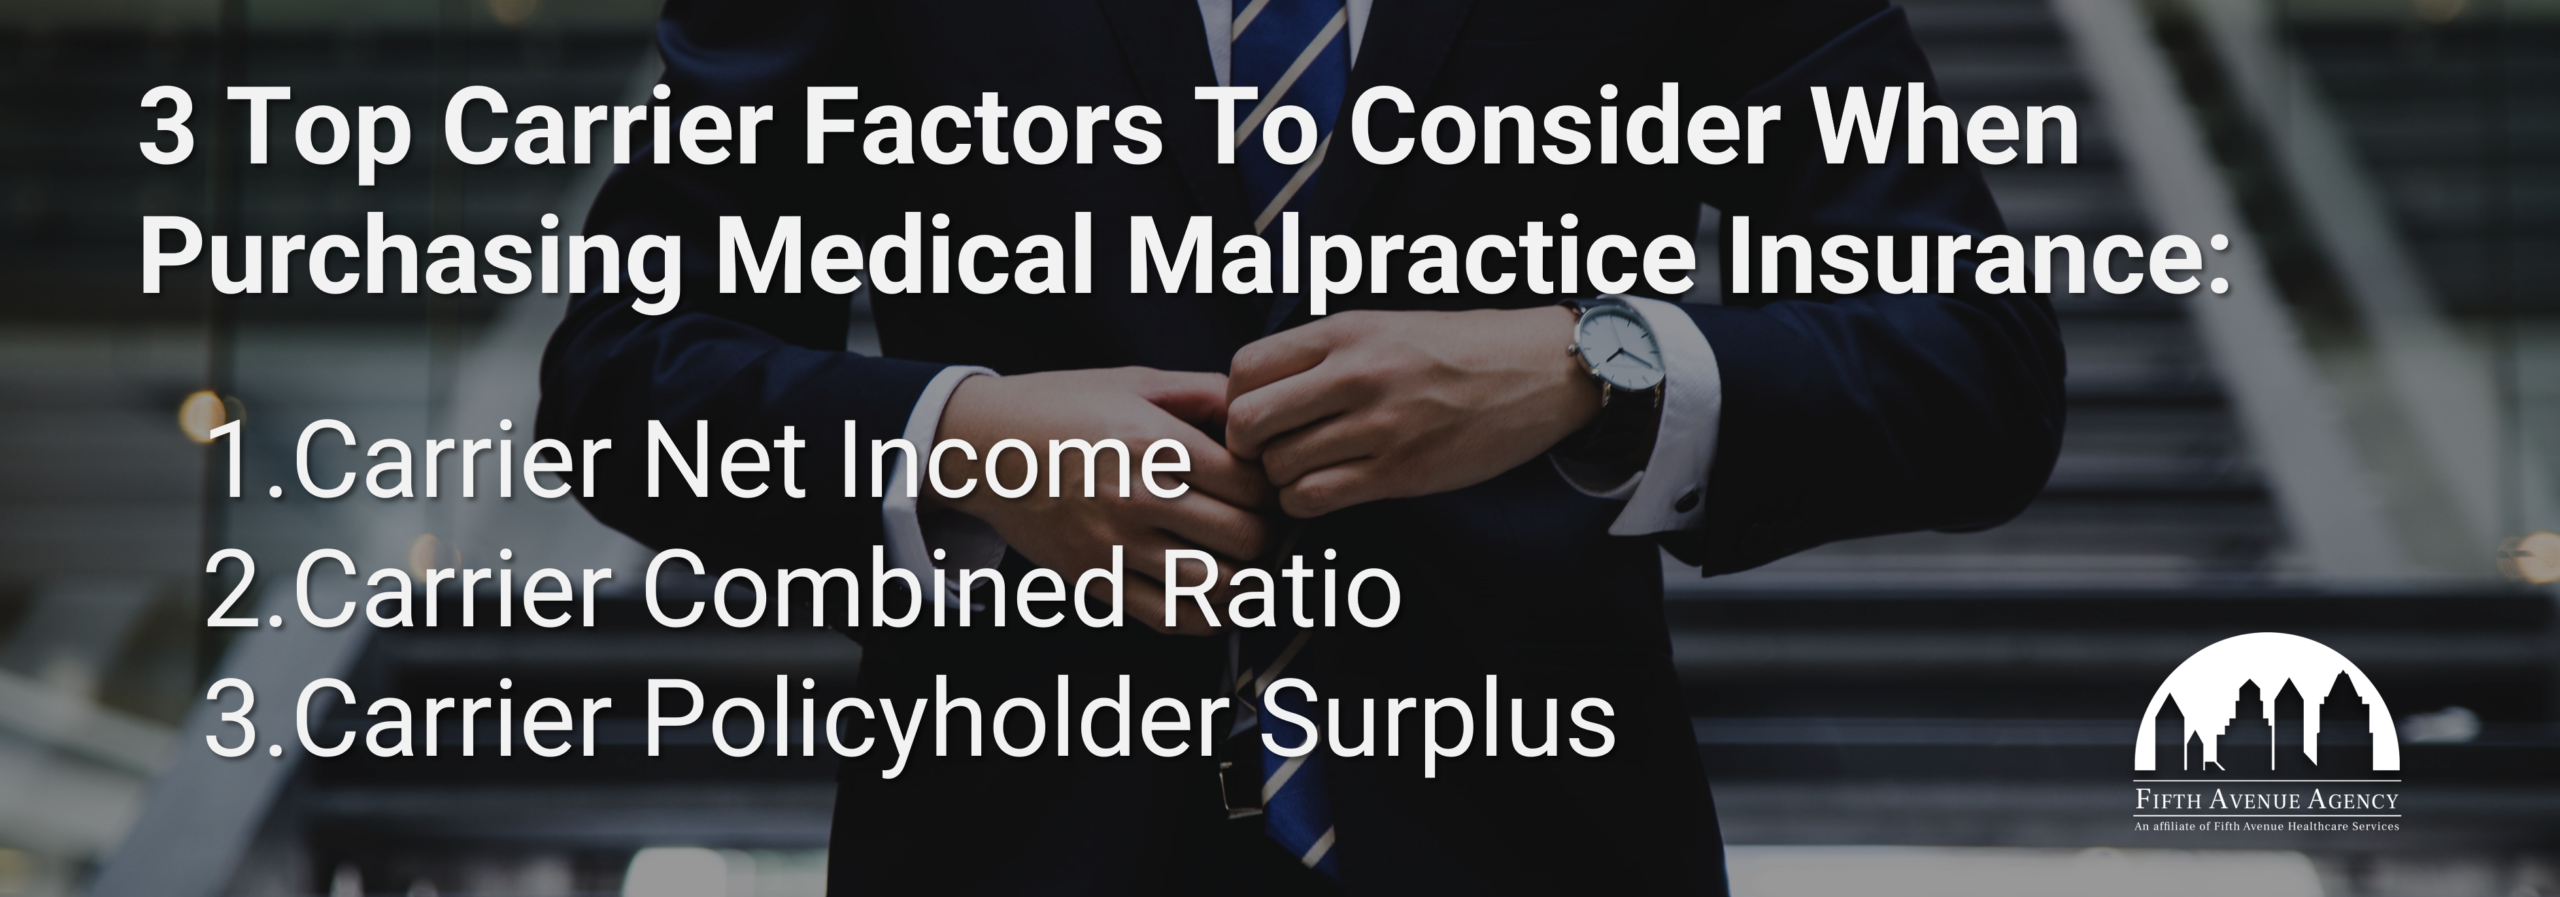 3 Top Carrier Factors To Consider When Purchasing Medical Malpractice Insurance